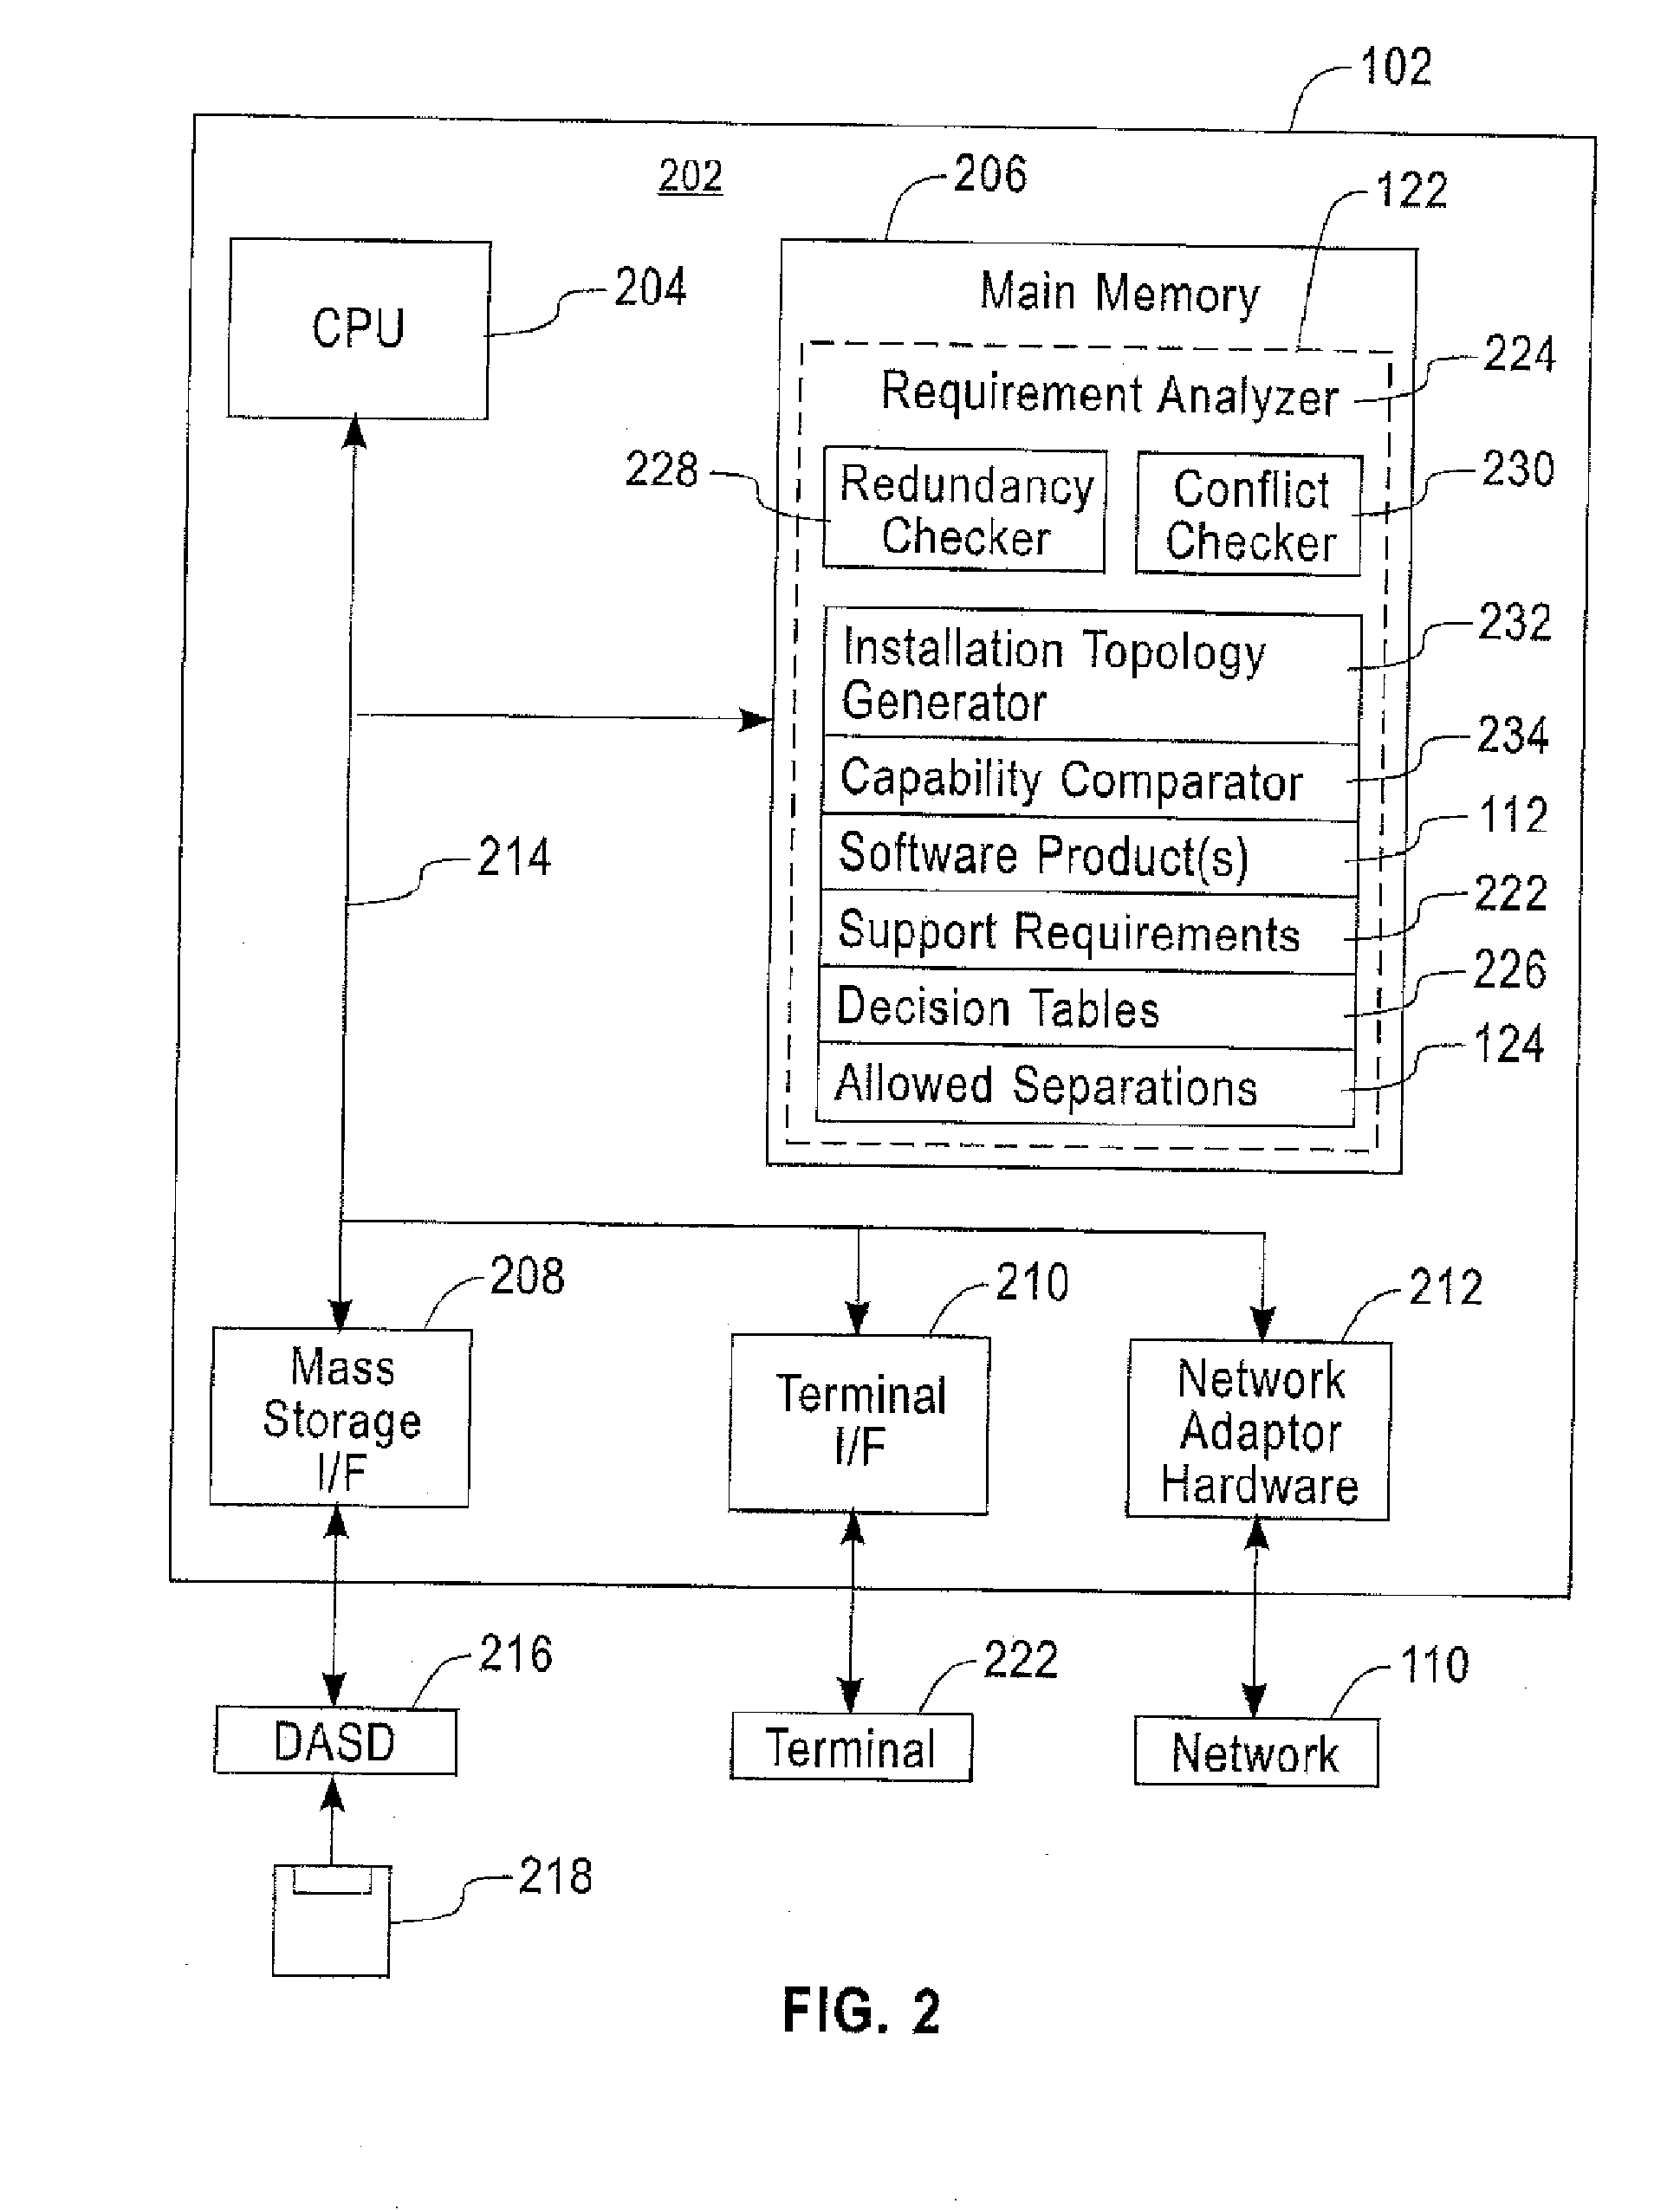 System and method for matching multi-node software system provisioning requirements and capabilities using rough set theory